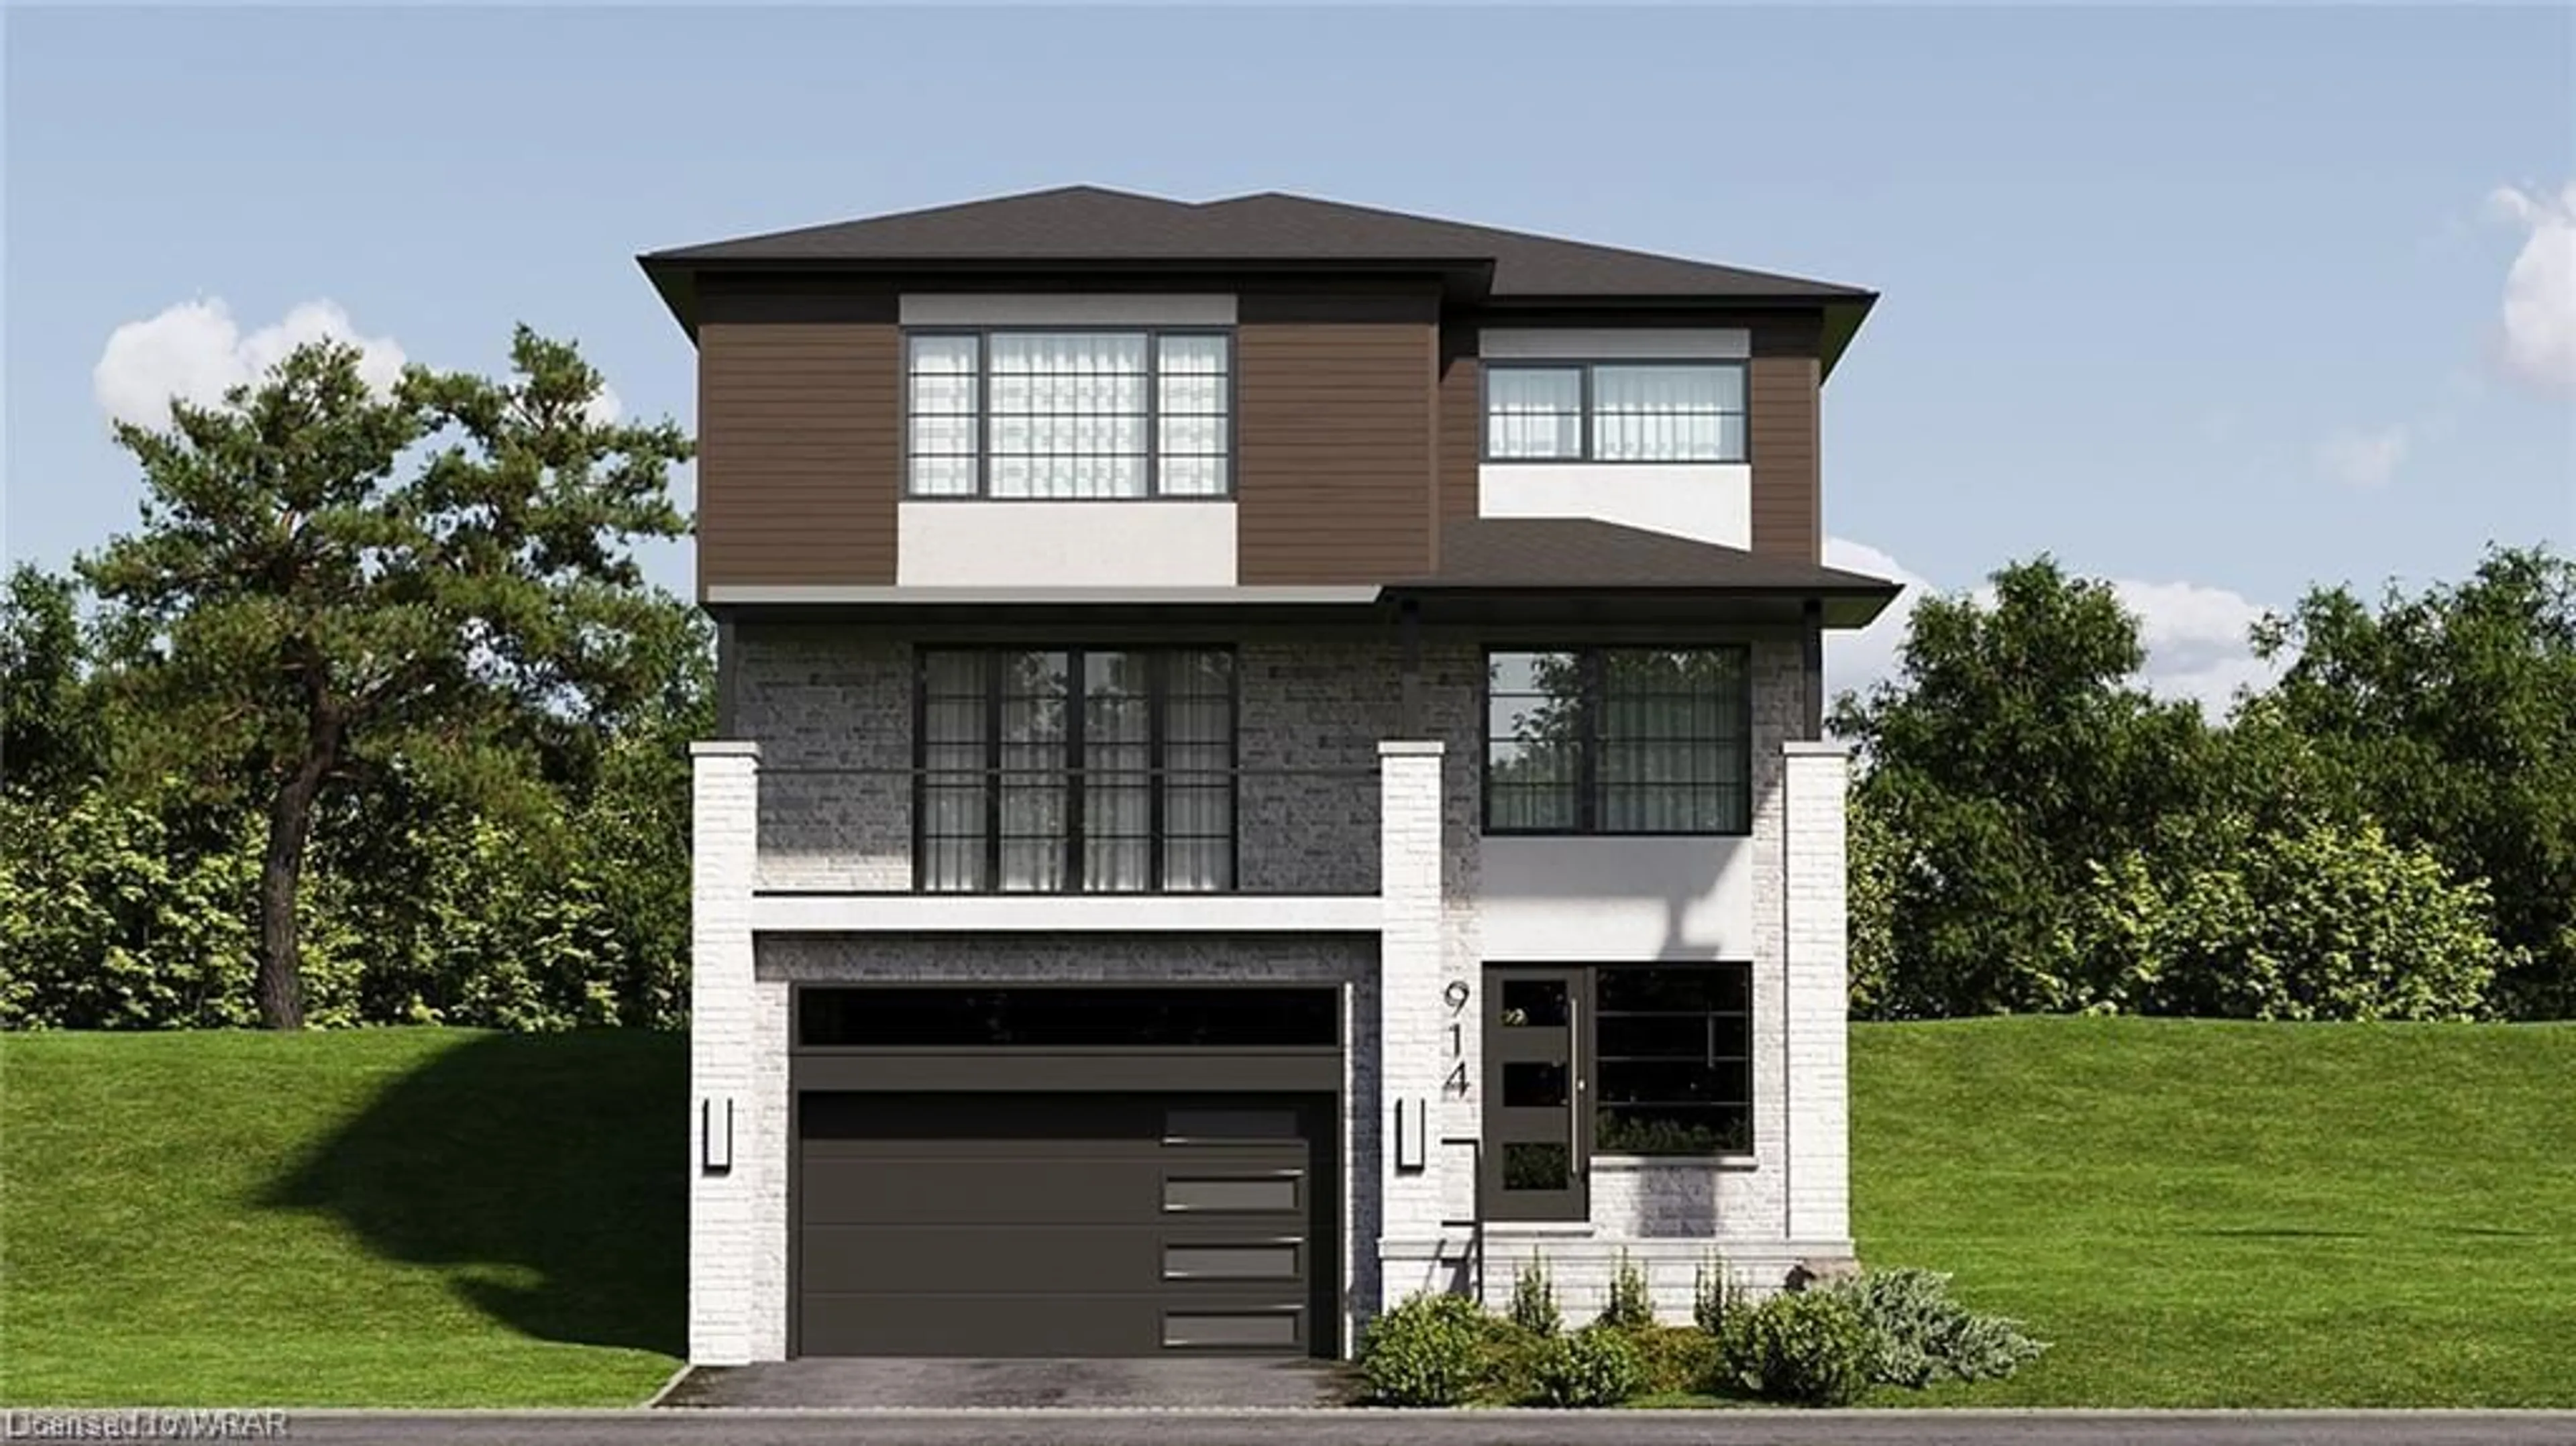 Frontside or backside of a home for 914 Doon Village Rd, Kitchener Ontario N2P 1A4